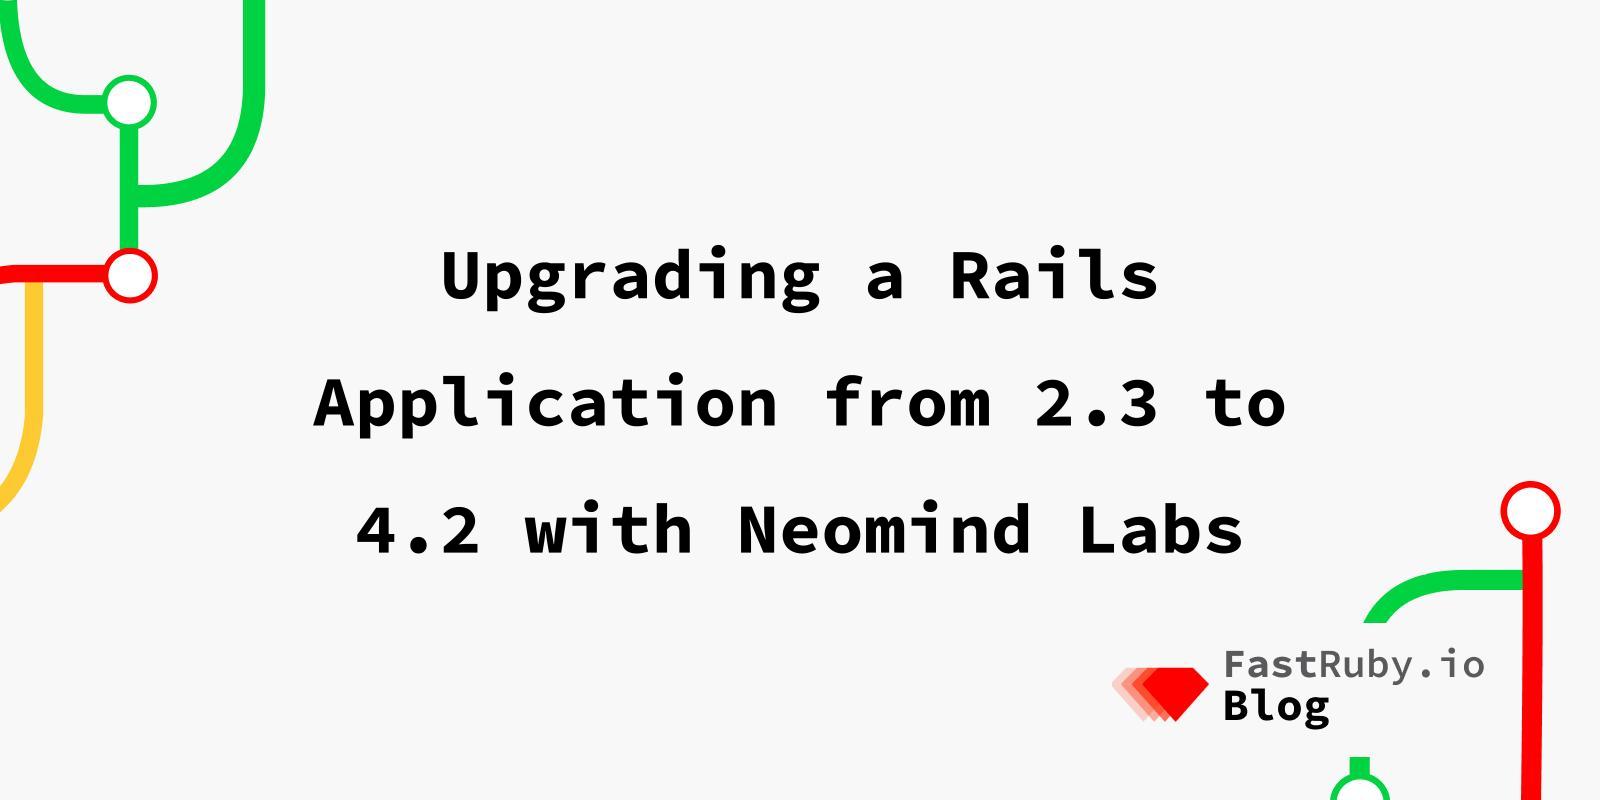 Upgrading a Rails Application from 2.3 to 4.2 with Neomind Labs